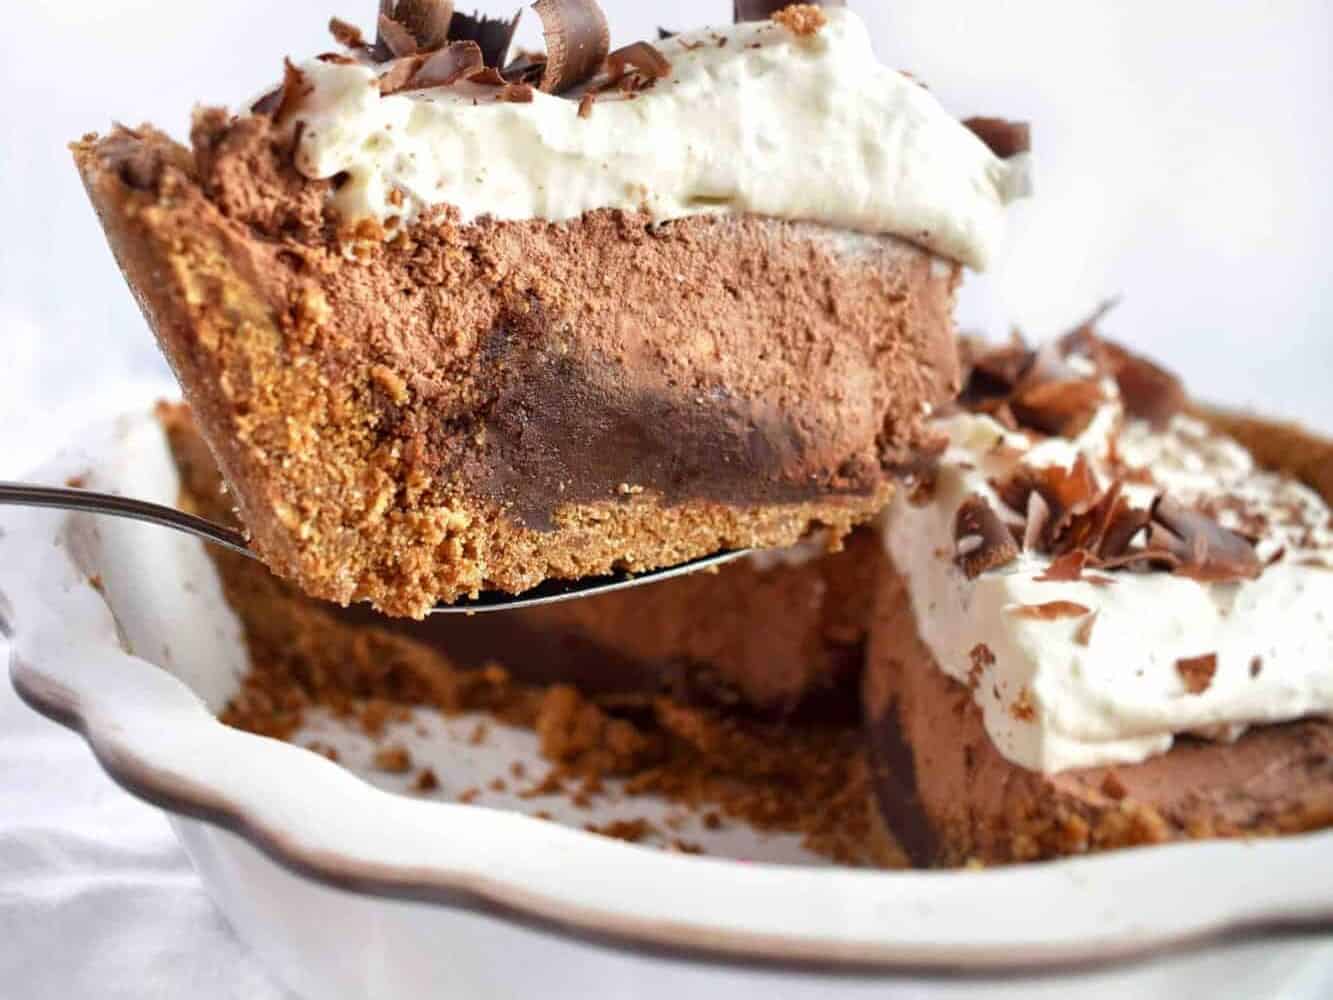 A slice of chocolate ice cream pie with whipped cream.